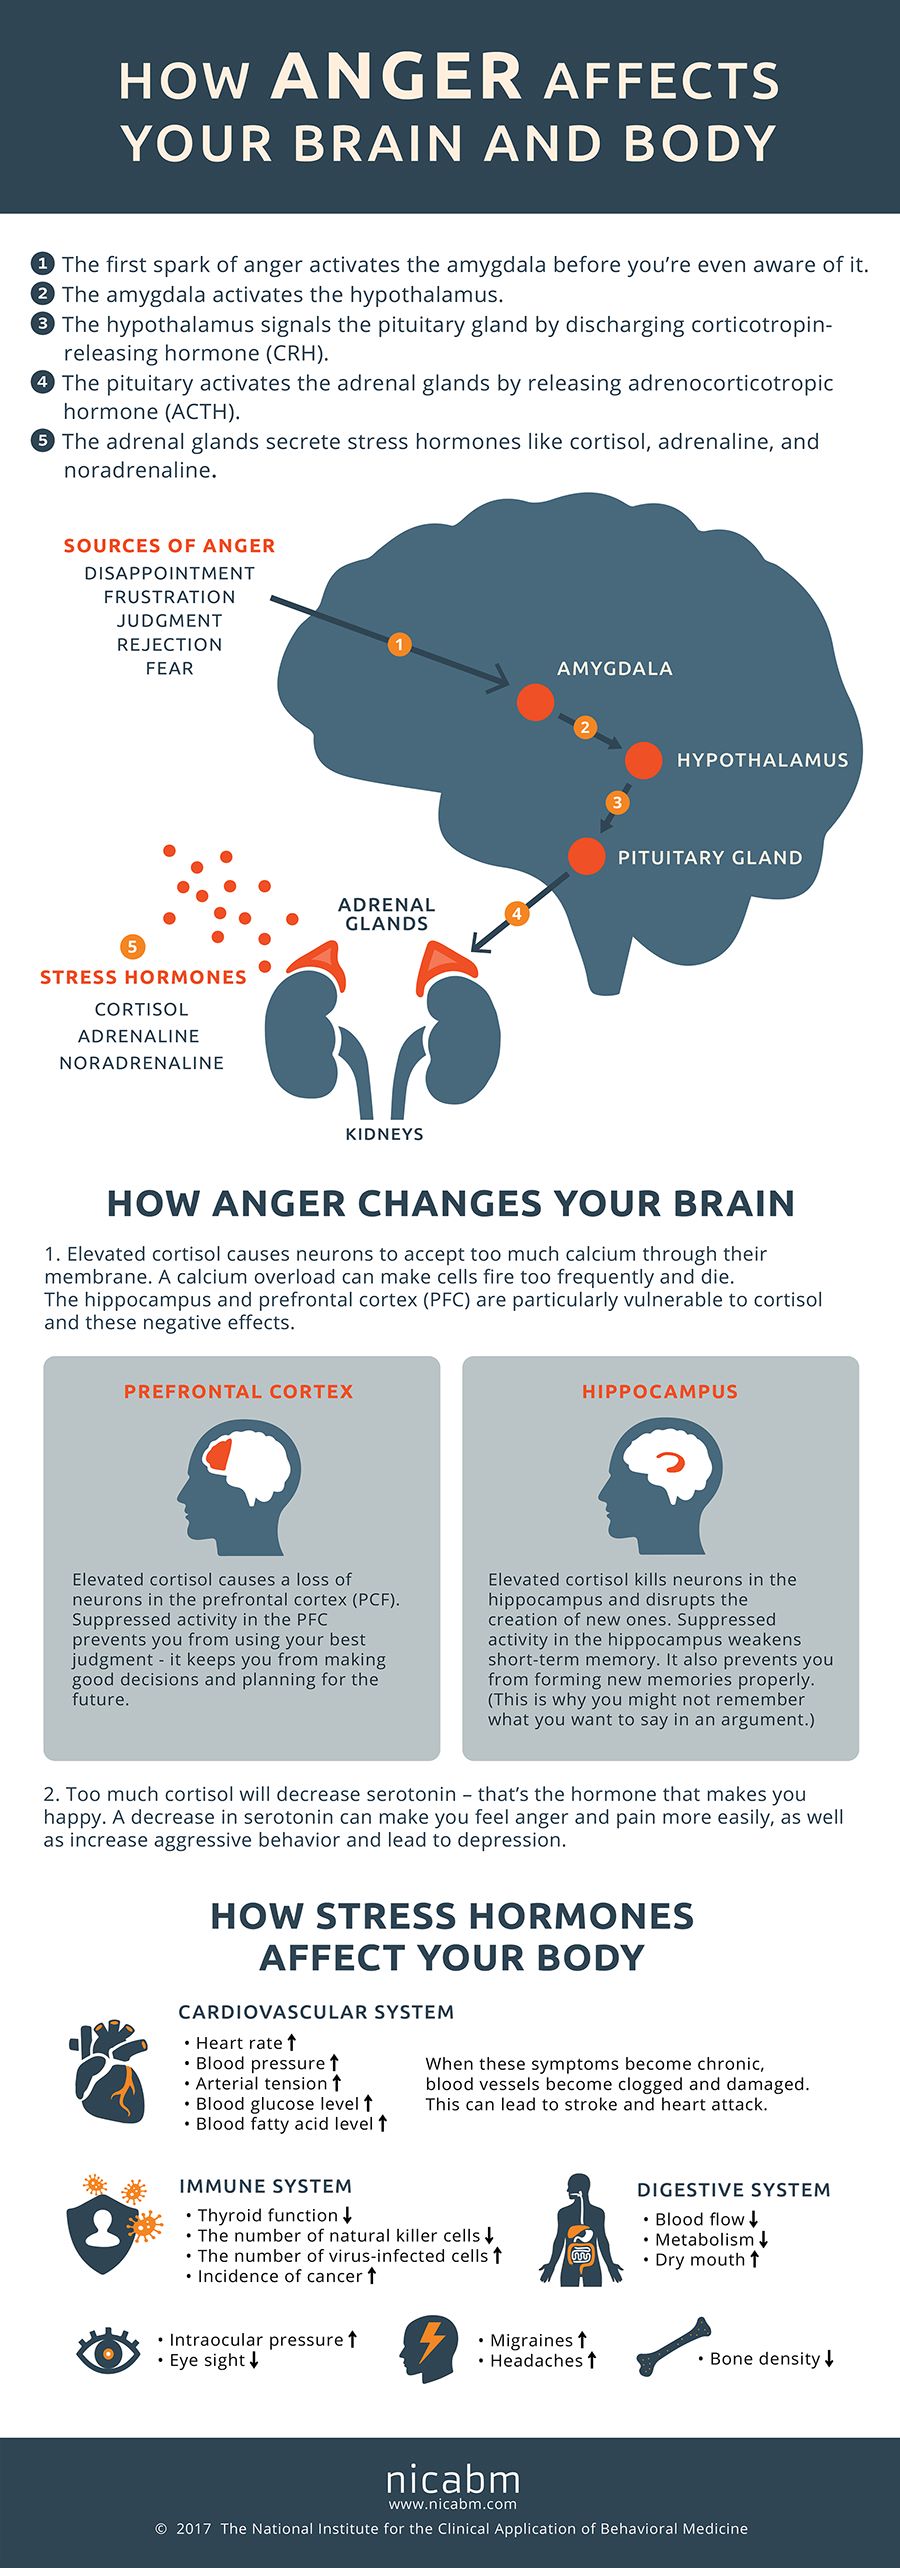 Effects of Anger